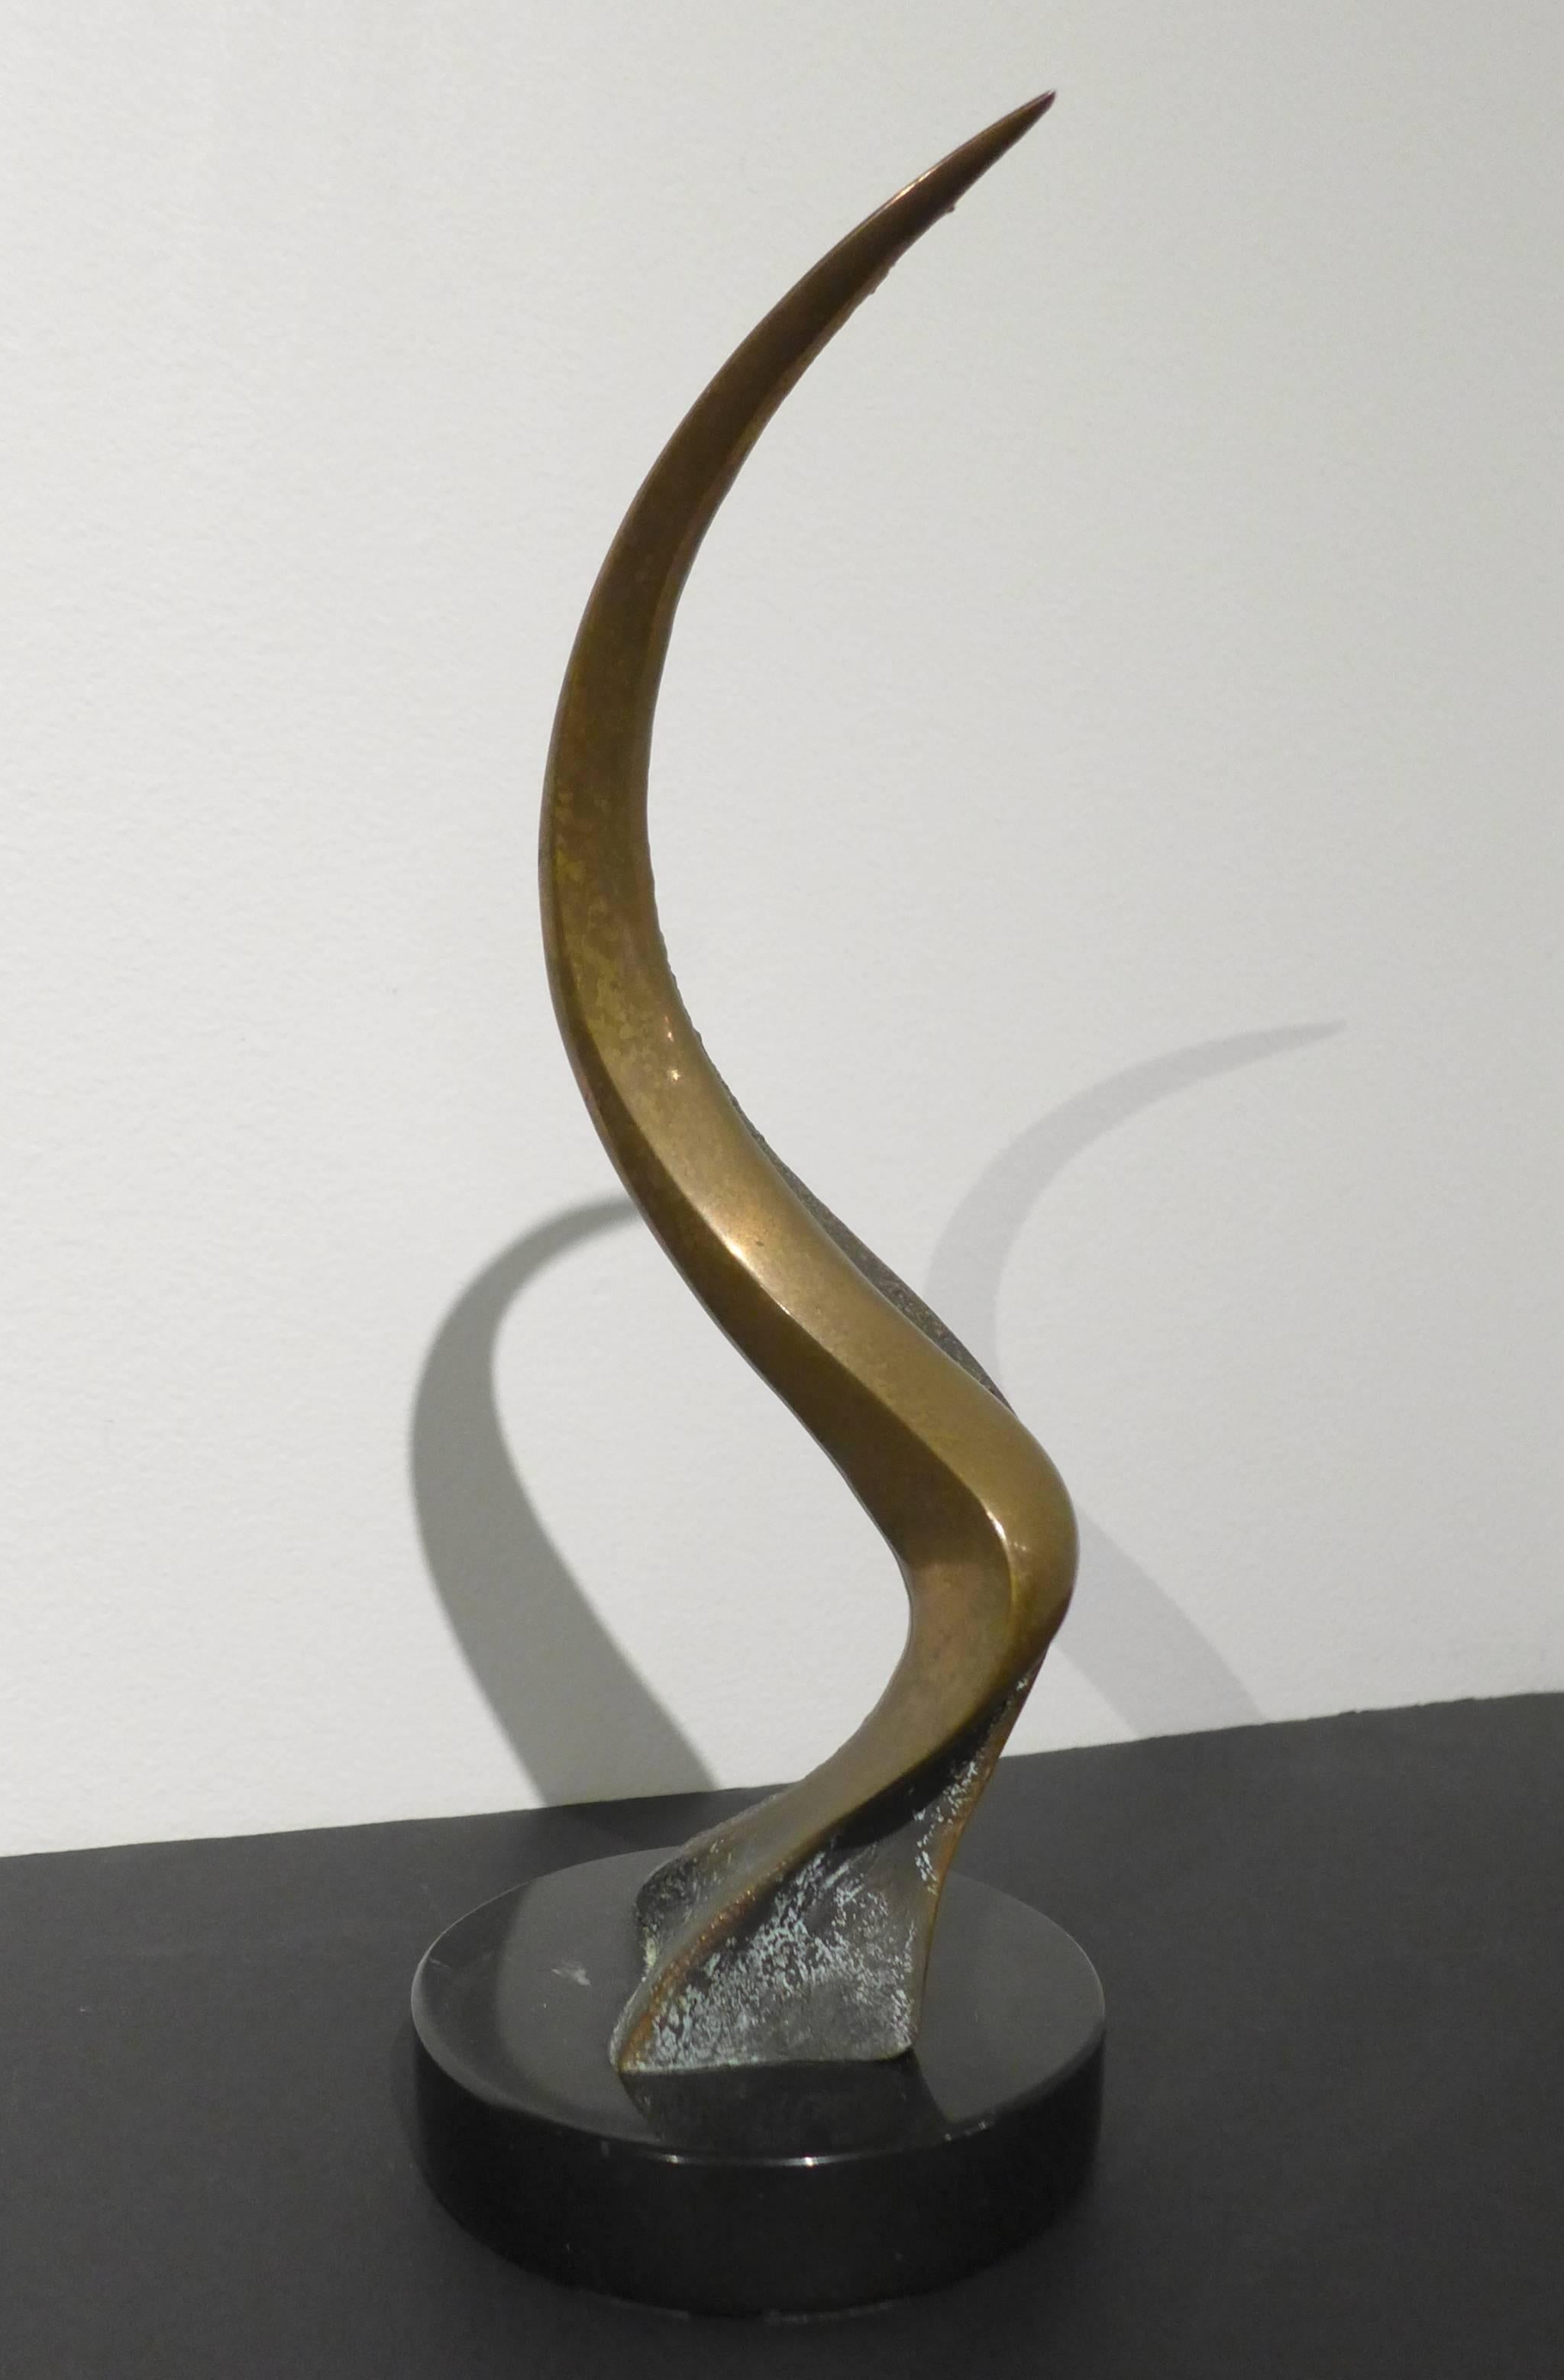 Cast bronze abstract sculpture on a polished marble base by Carmel, CA artist Tom Bennett. The polished bronze typical of the Bennett Brothers work is contrasted here with a textured and patinated section. Identical twins Tom and Bob Bennett